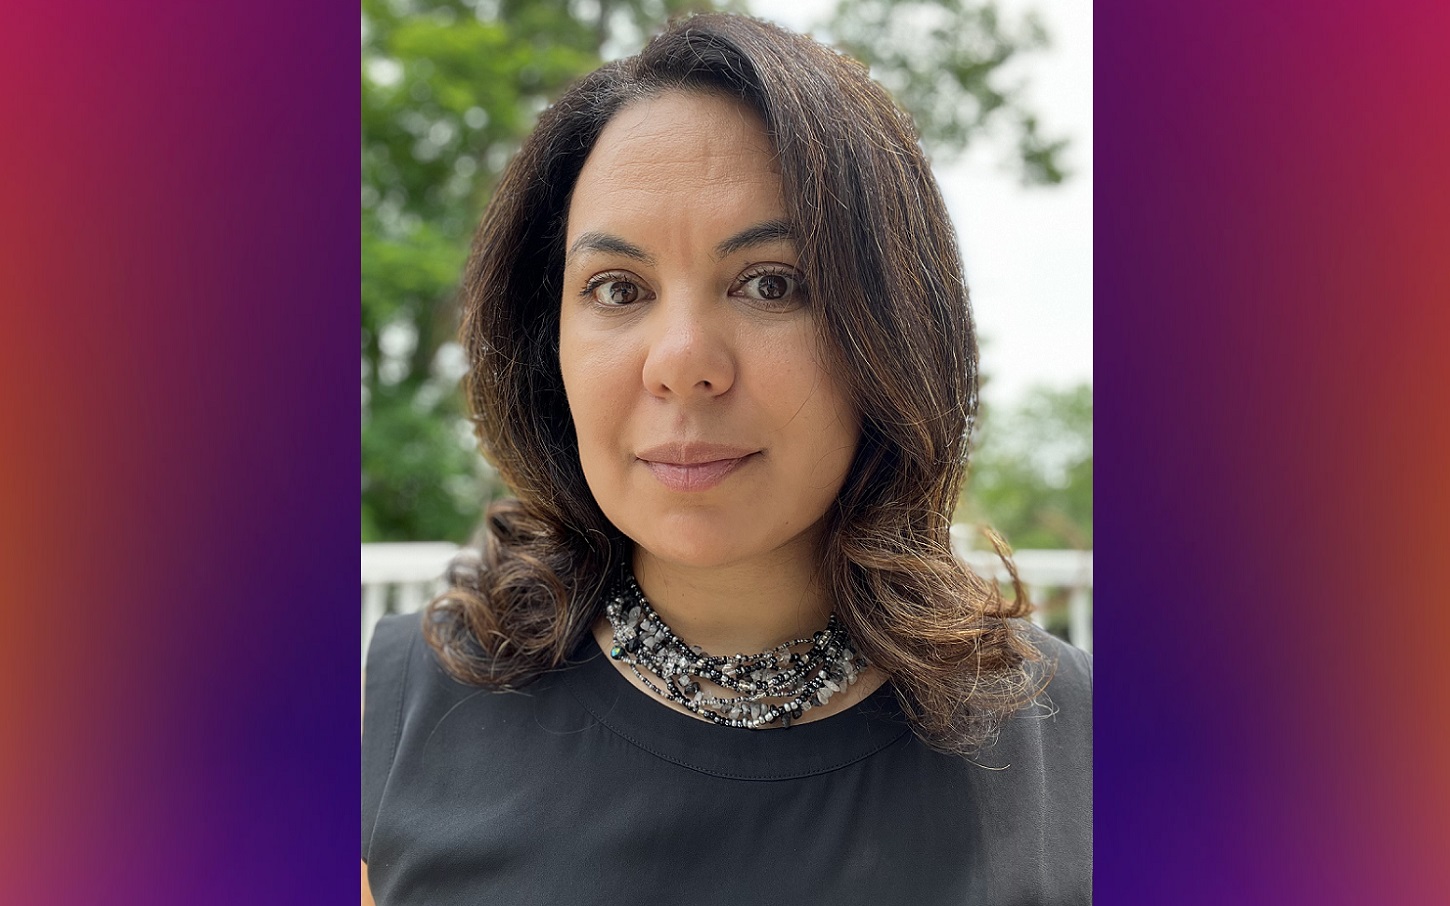 Nicole Rodriguez Leach named executive director of Grantmakers for Education: woman with medium length dark hair and and dark shirt outside